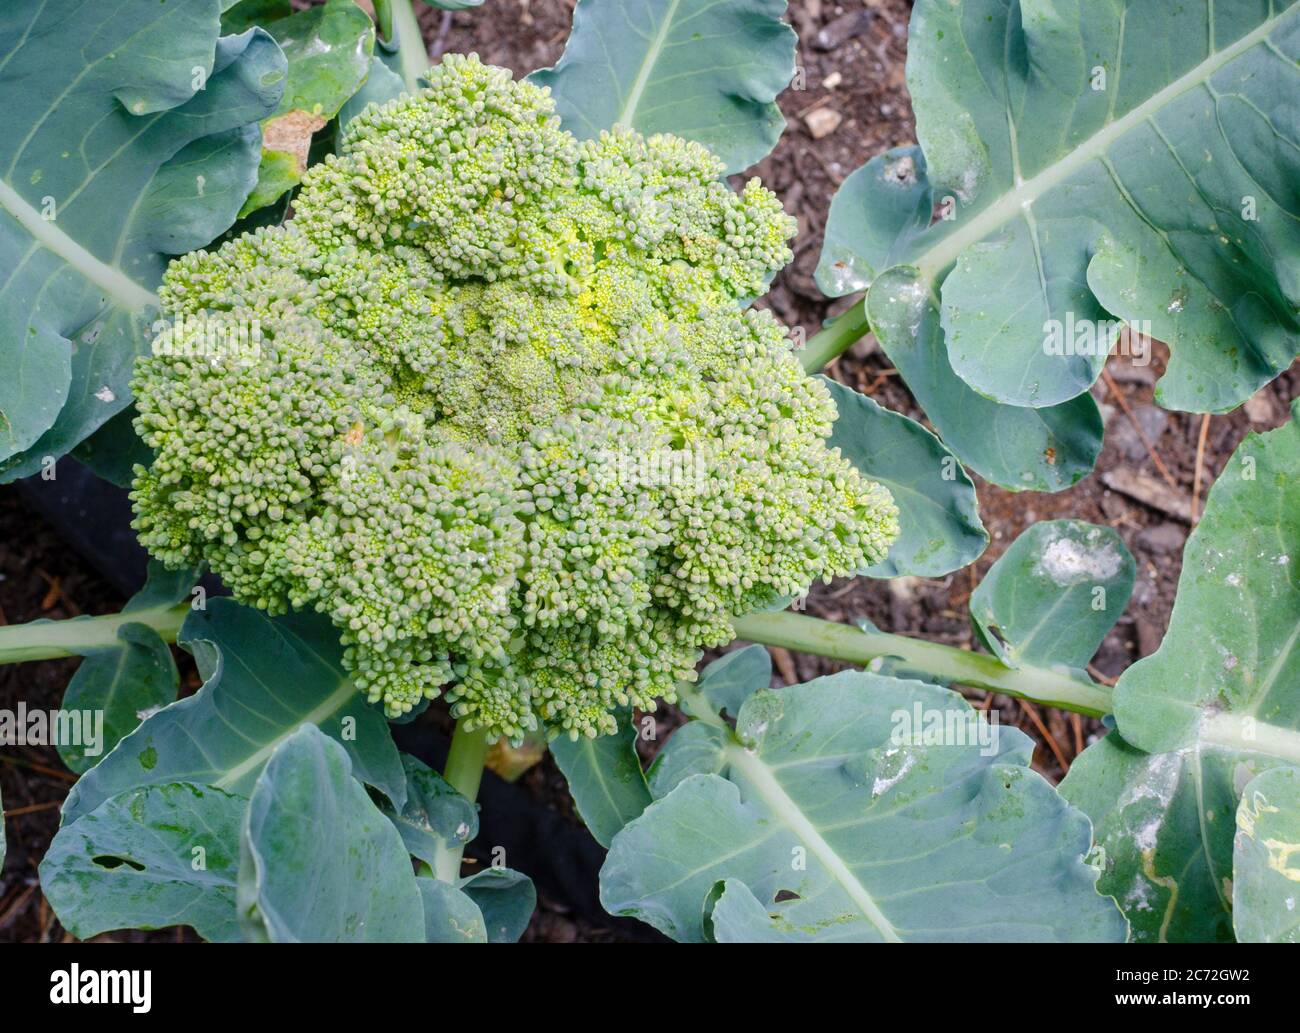 Macro close-up of a growing broccoi head florets in garden from above Stock Photo